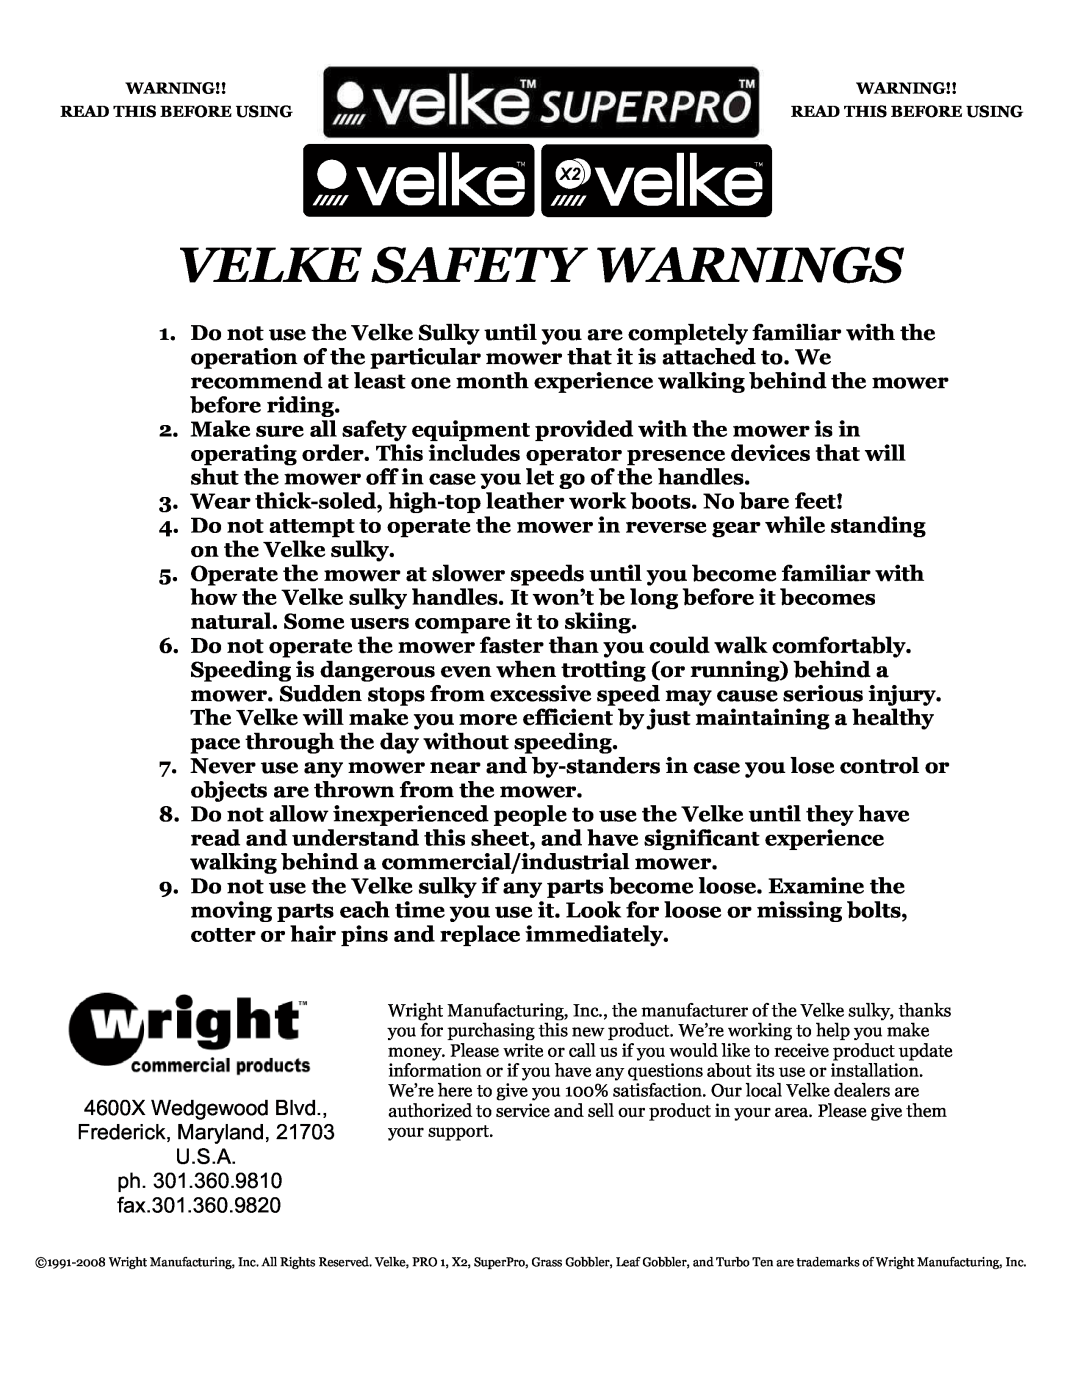 Wright Manufacturing VKX2-3(R installation instructions Velke Safety Warnings, ph. 301.360.9810 fax.301.360.9820 